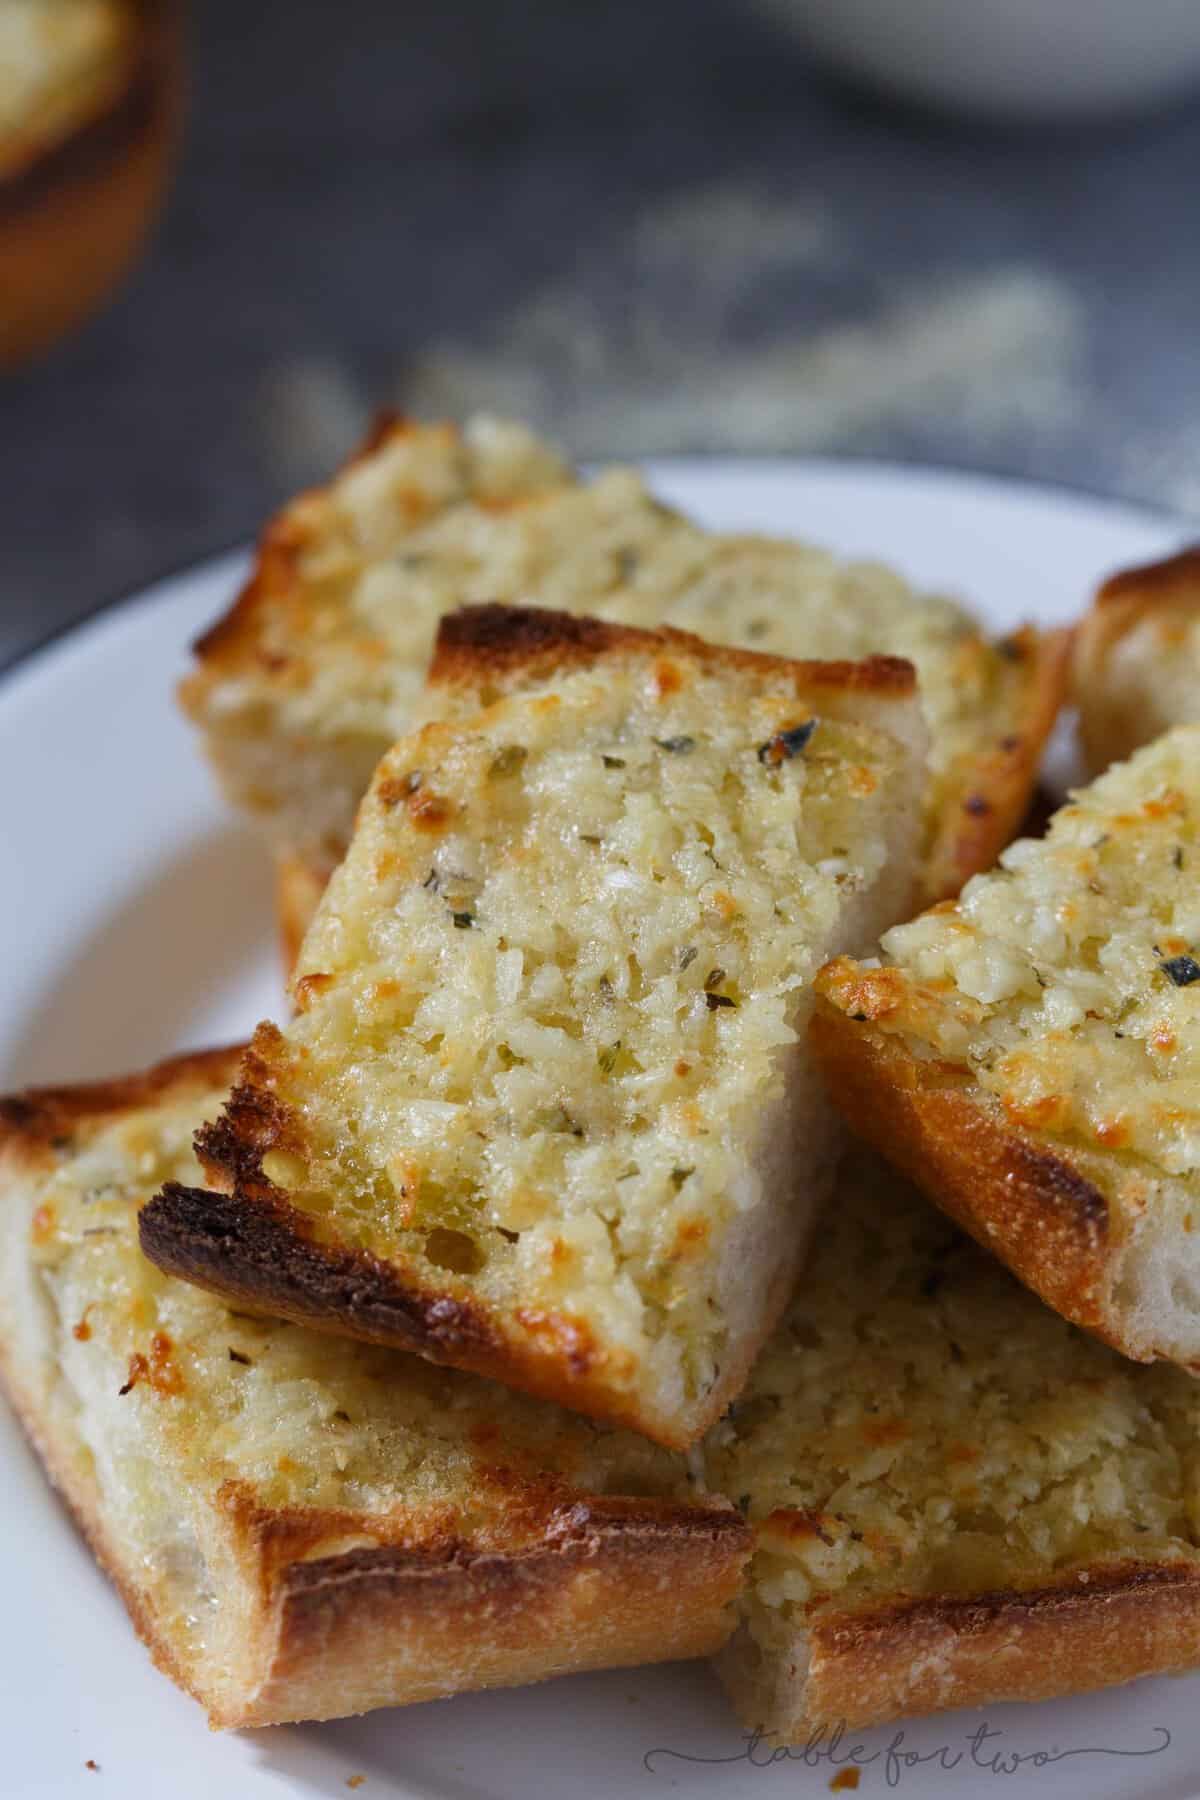 The title of this recipe says it all. Kiss me if you dare because after noshing on this extra garlicky and cheesy bread, you're probably going to second guess it. However, eating this bread is 100% worth the garlicky breath.